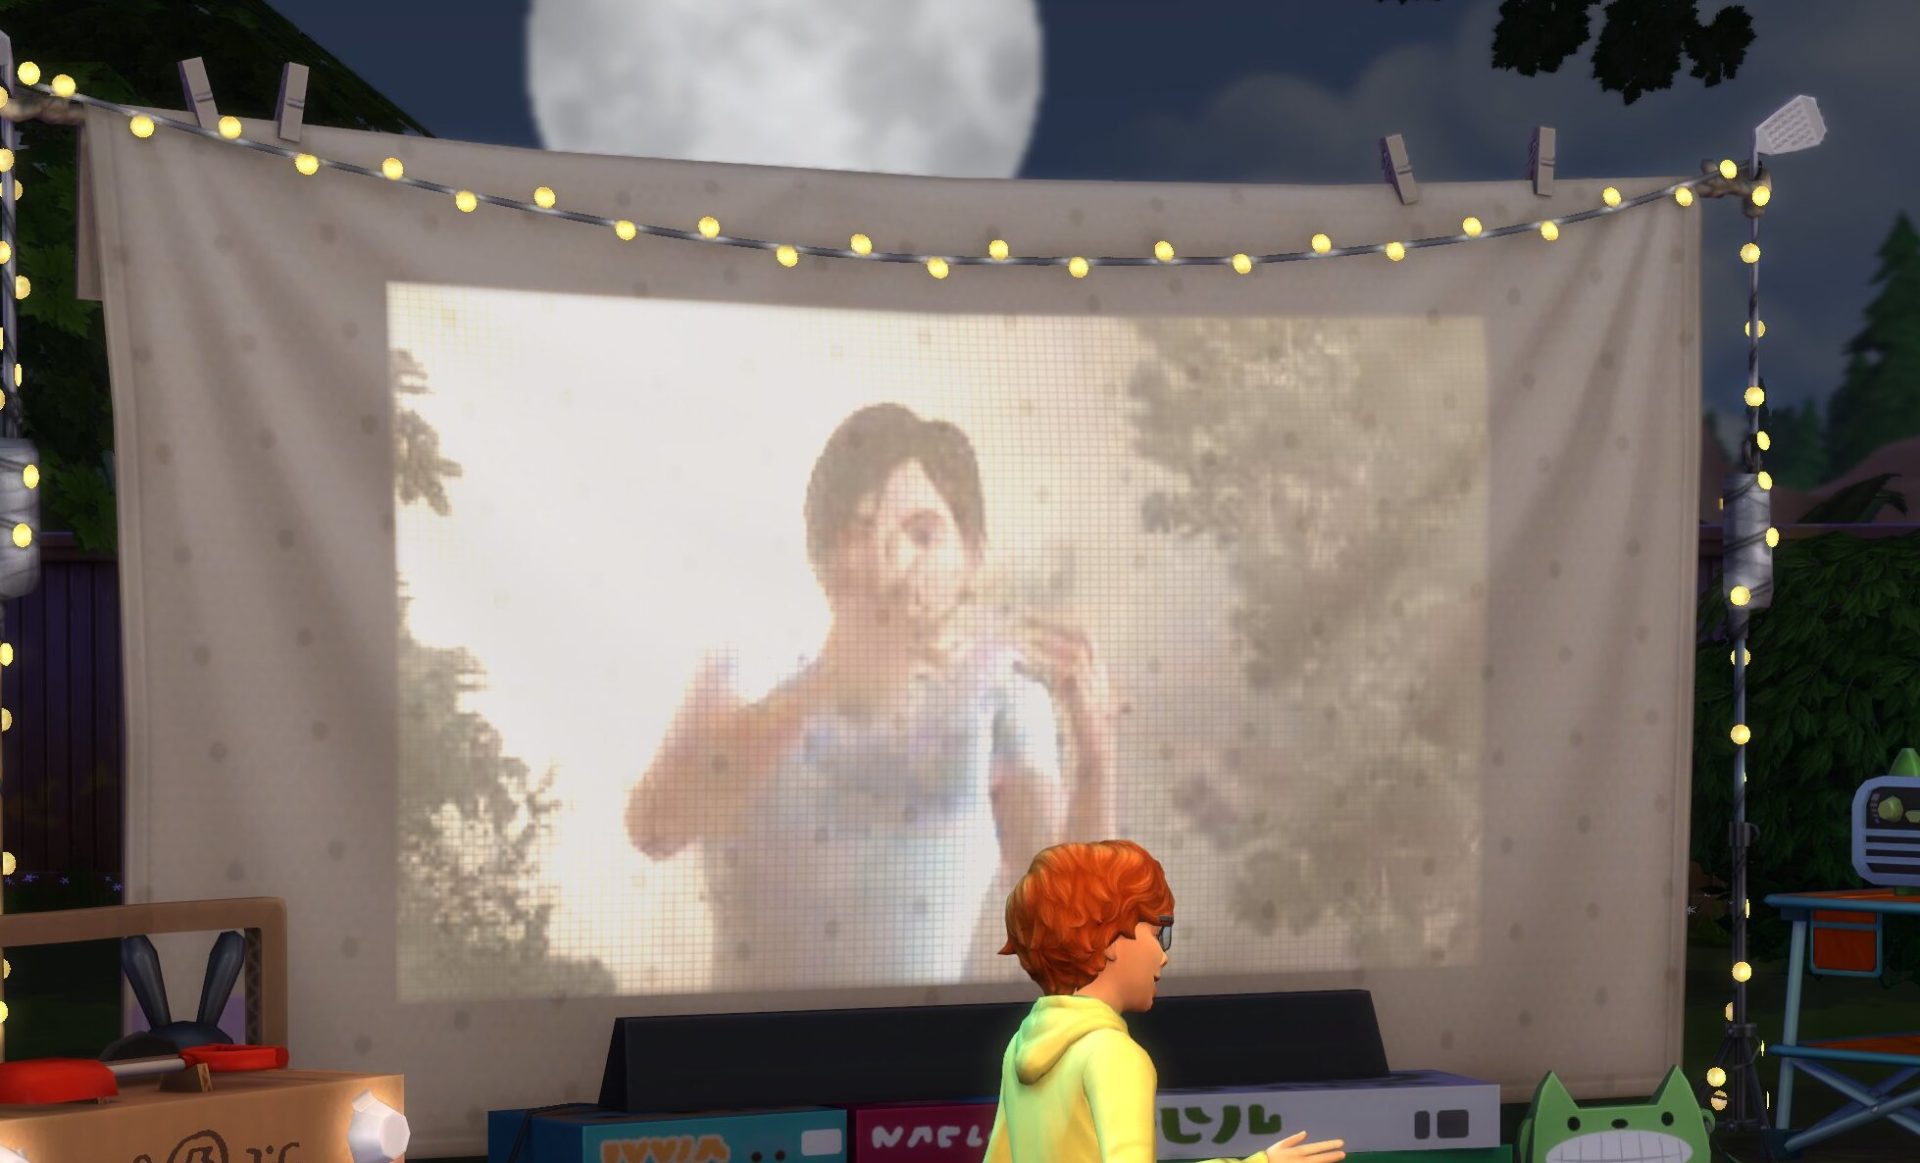 Sims 4 announced two new kits and... more clues about werewolves?